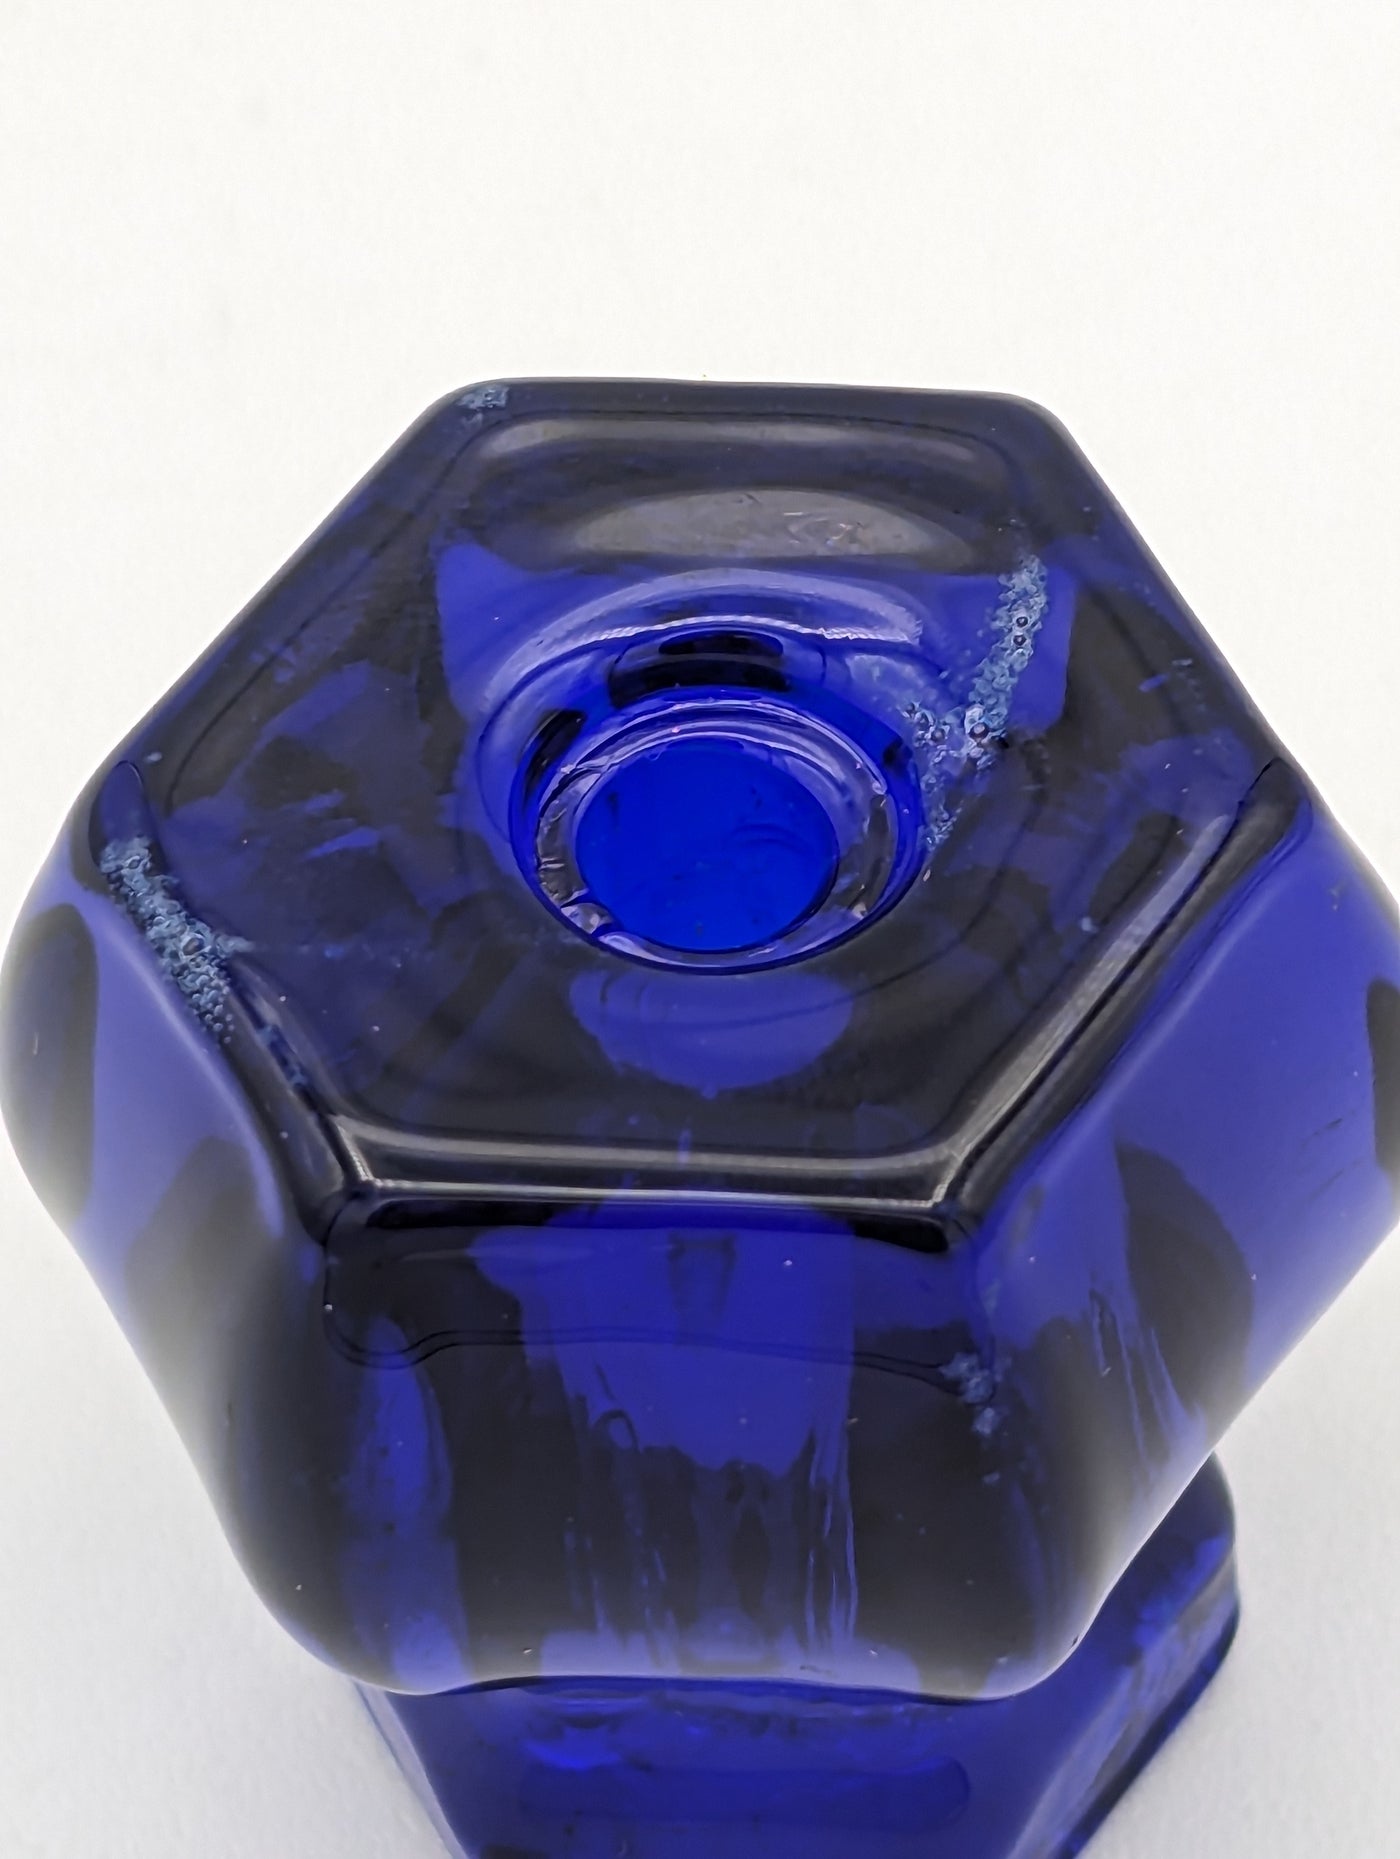 Open Box Sale Item 1 1/2 Inch Depression Hexagon Glass Cabinet and Furniture Knobs (Cobalt Blue Color)